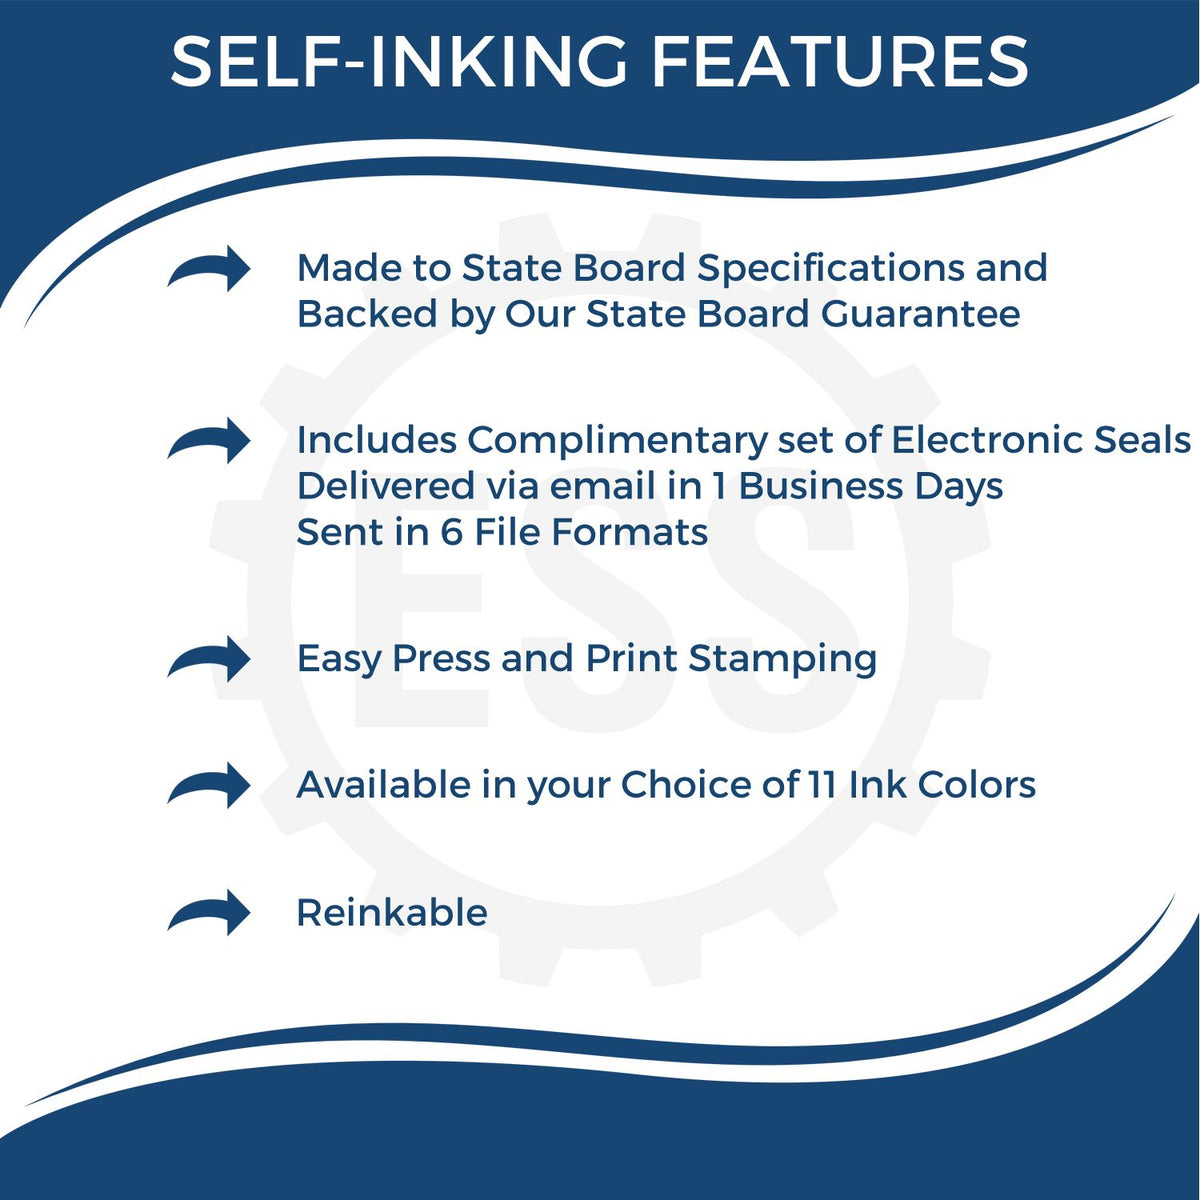 A picture of an infographic highlighting the selling points for the Self-Inking Washington Landscape Architect Stamp